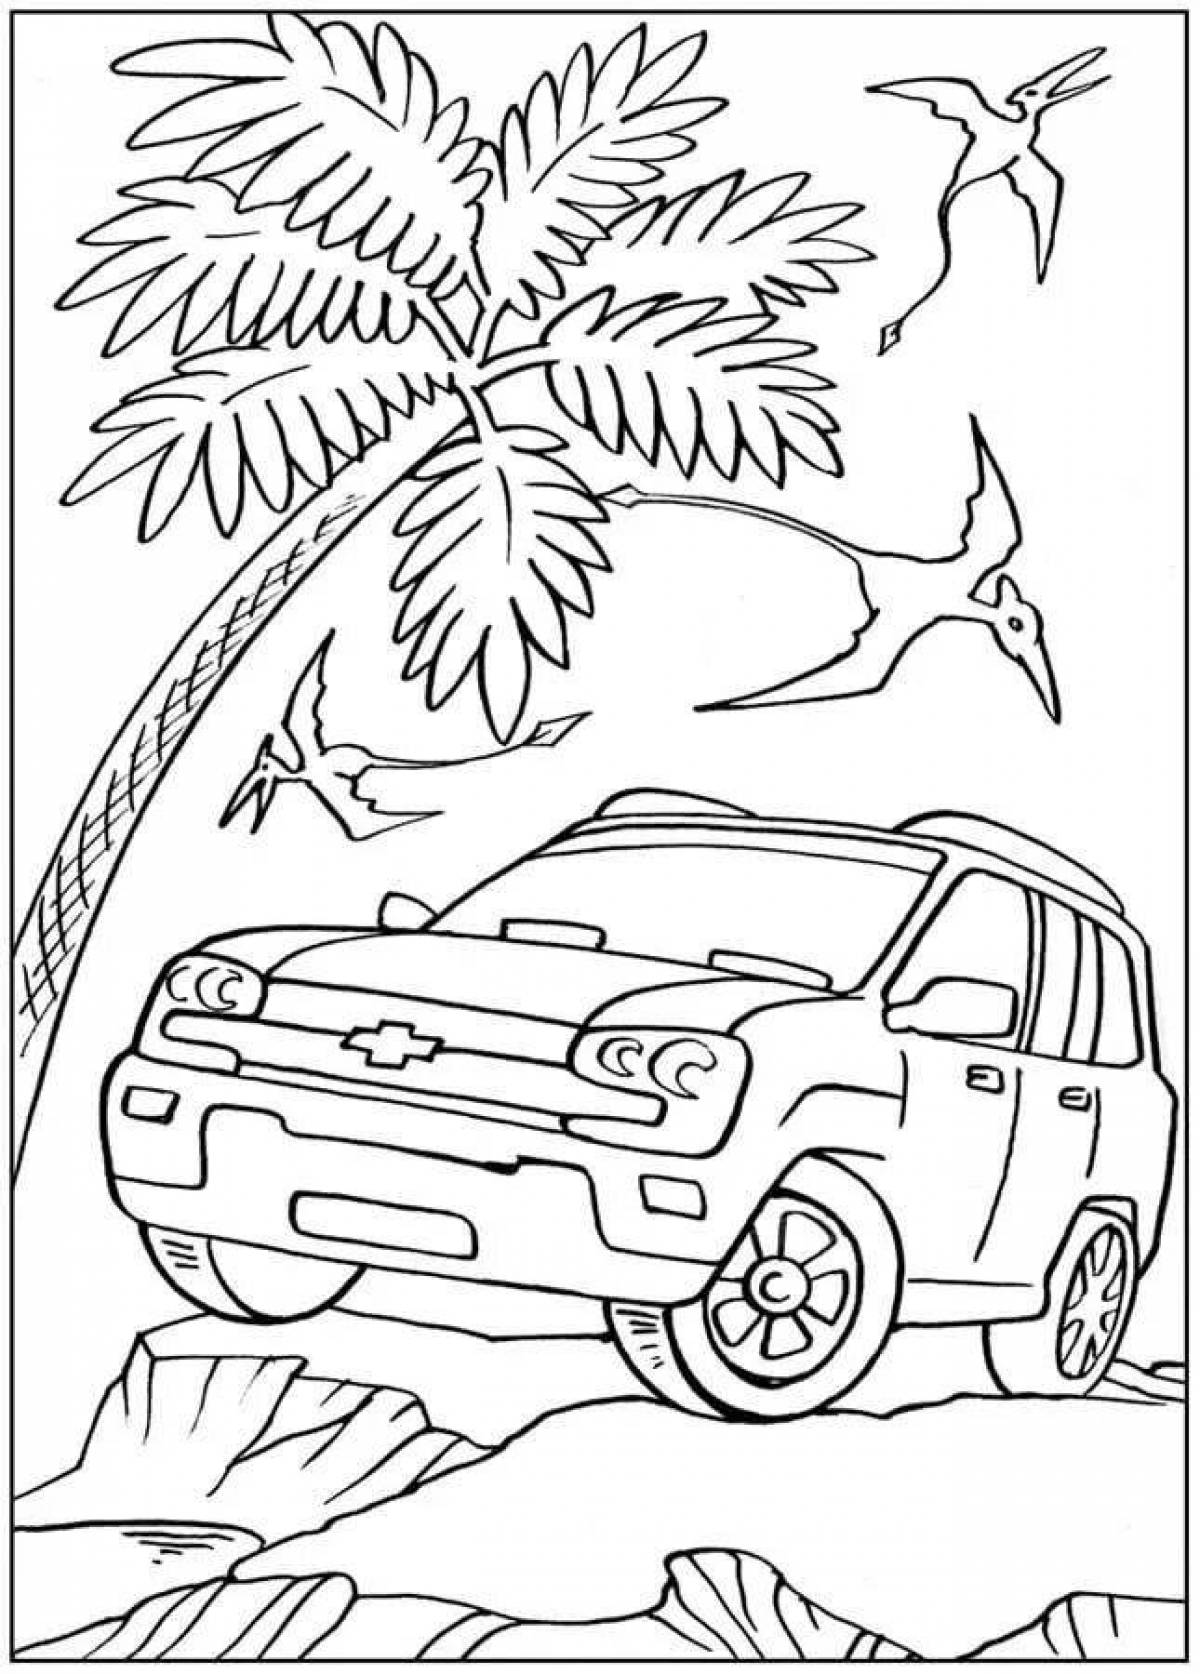 Amazing car coloring pages for 7 year old boys